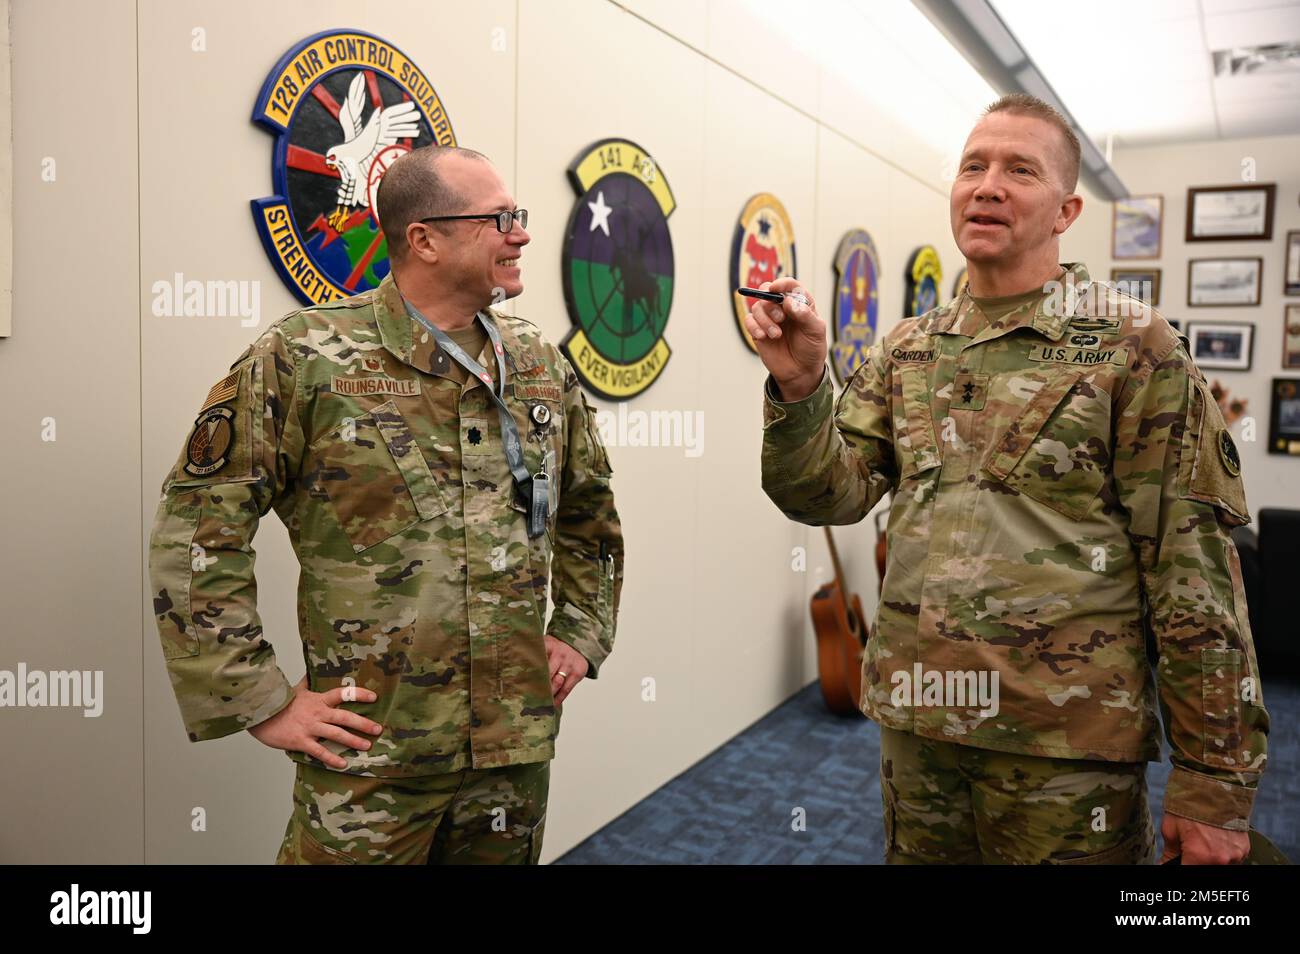 From left, U.S. Air Force Lt. Col. Wesley Rounsaville, 727th Expeditionary Air Control Squadron commander, and U.S. Army Maj. Gen. Thomas Carden, Georgia National Guard adjutant general, during an immersion tour at Shaw Air Force Base, South Carolina, March 7, 2022. Immersion tours enable total force integration throughout AFCENT’s various mission sets and combat operations. (U.S. Air Force Staff Sgt. Blake Gonzales) Stock Photo